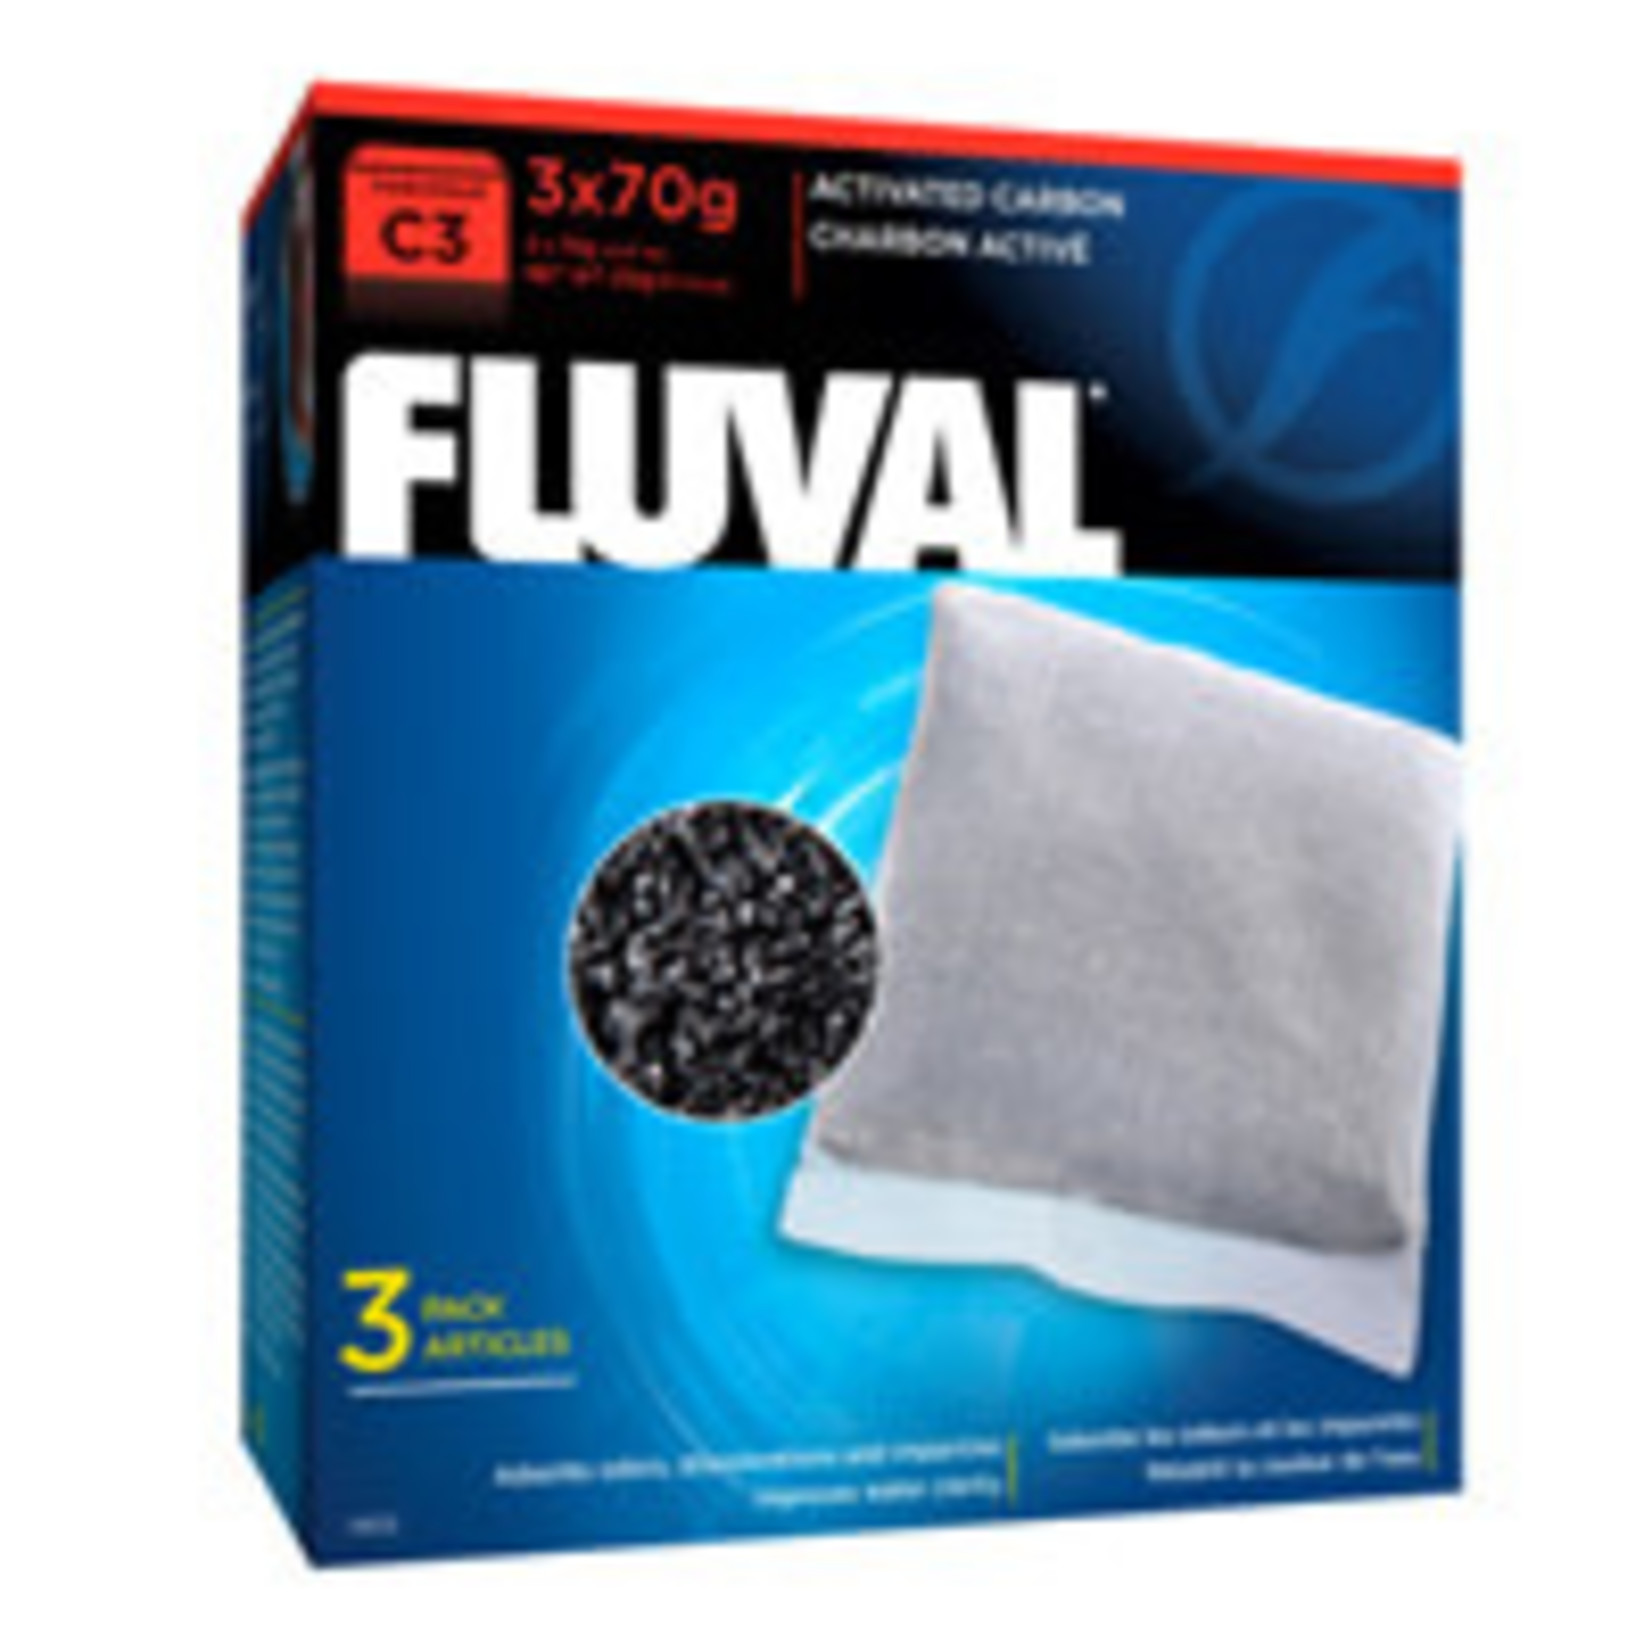 Fluval Fluval C3 Activated Carbon 3/70g